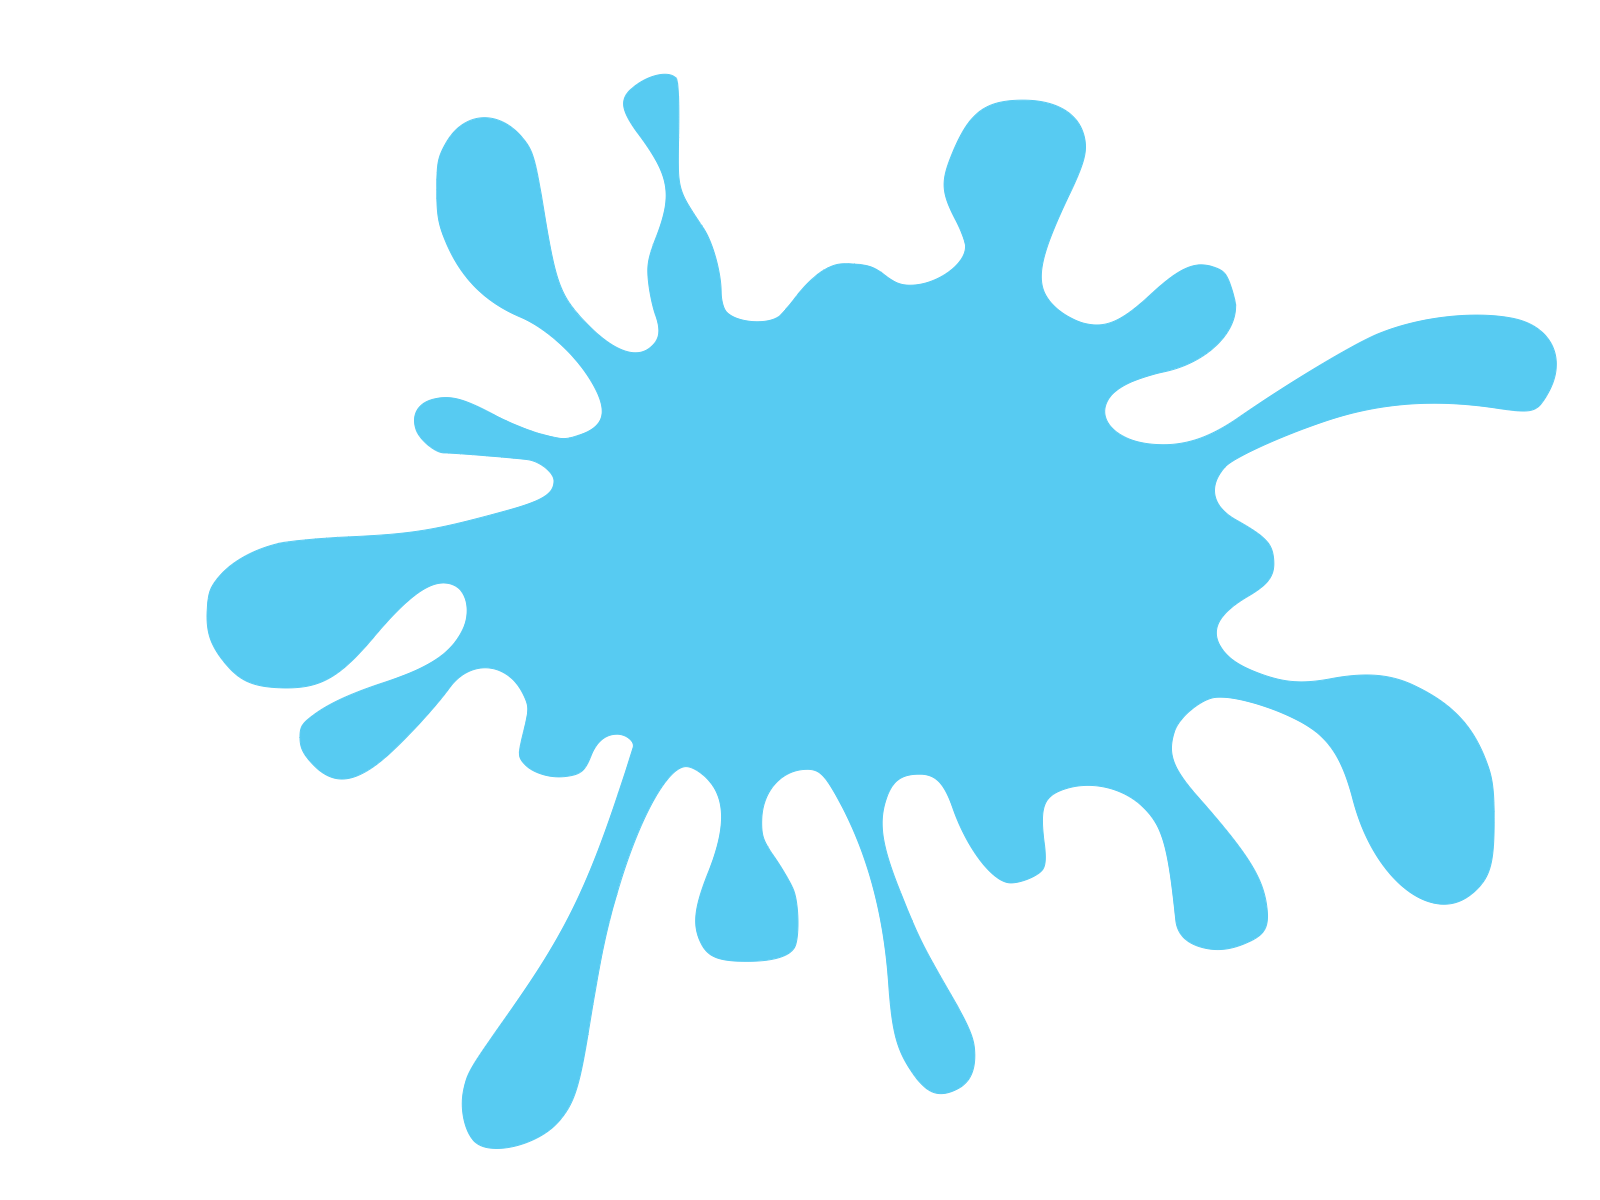  collection of water. Splash clipart glow